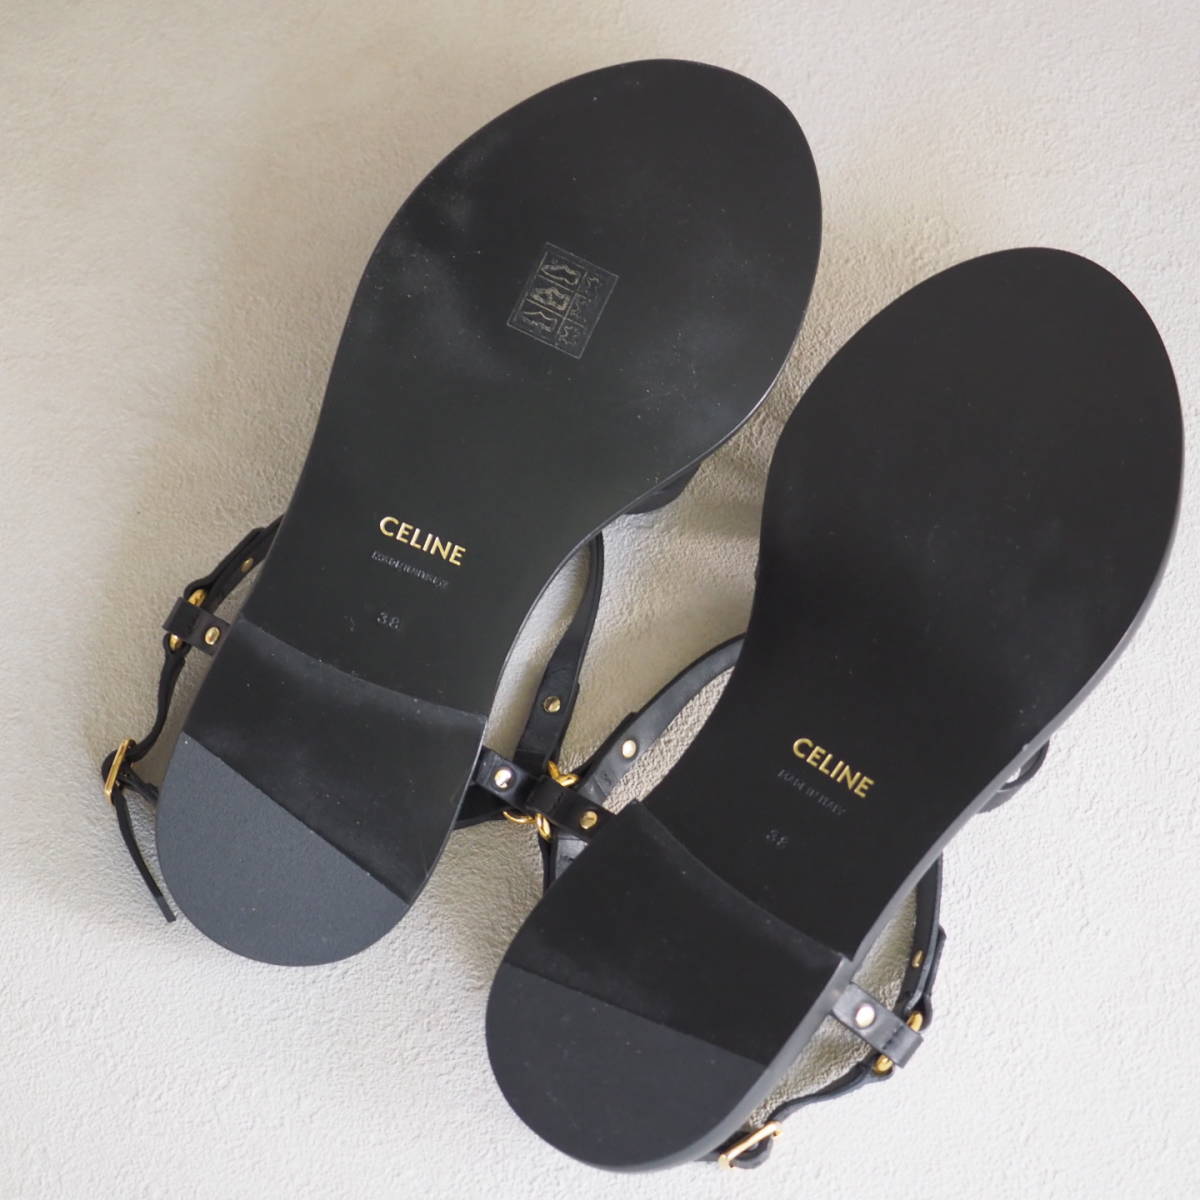  unused ultimate beautiful goods * Celine CELINEta with a self-starter sandals leather flat shoes 38 24cm M size shoes box black black brand lady's 